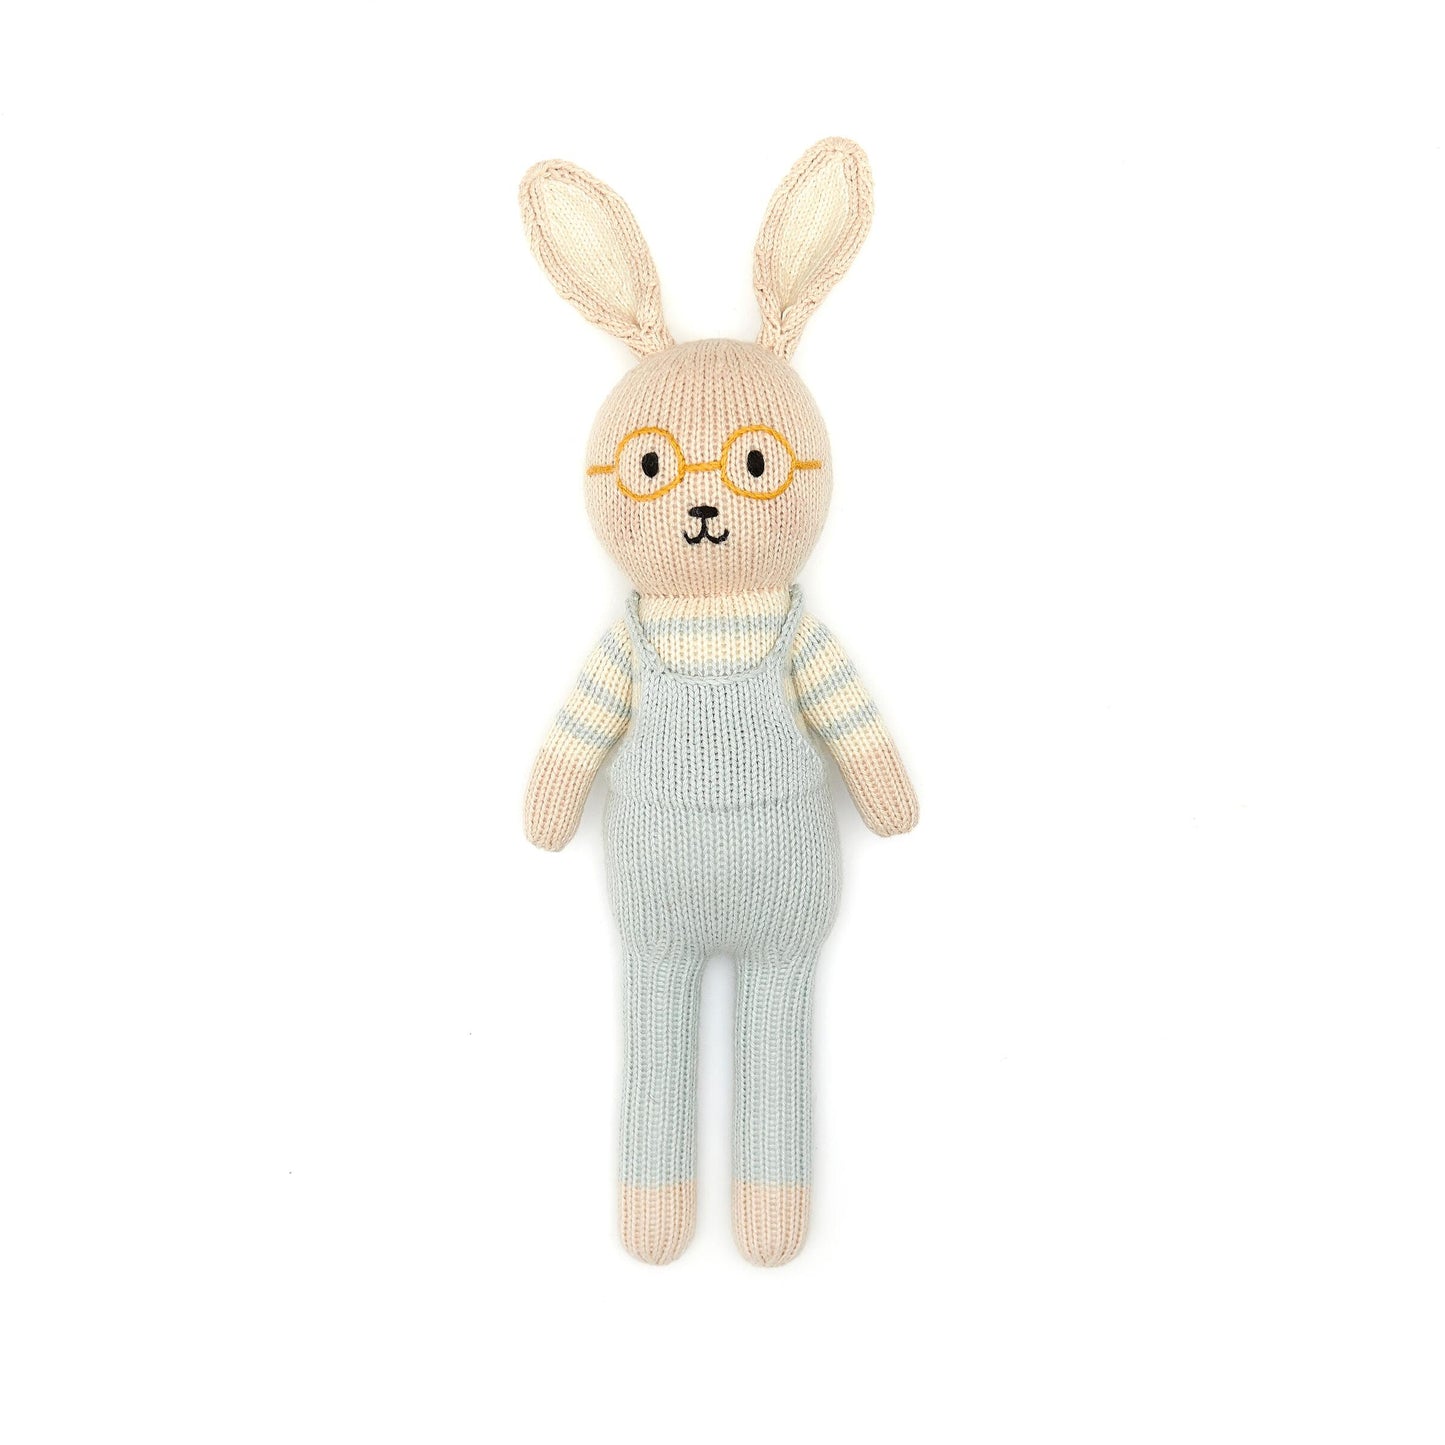 Mike the Bunny in Blue Overall